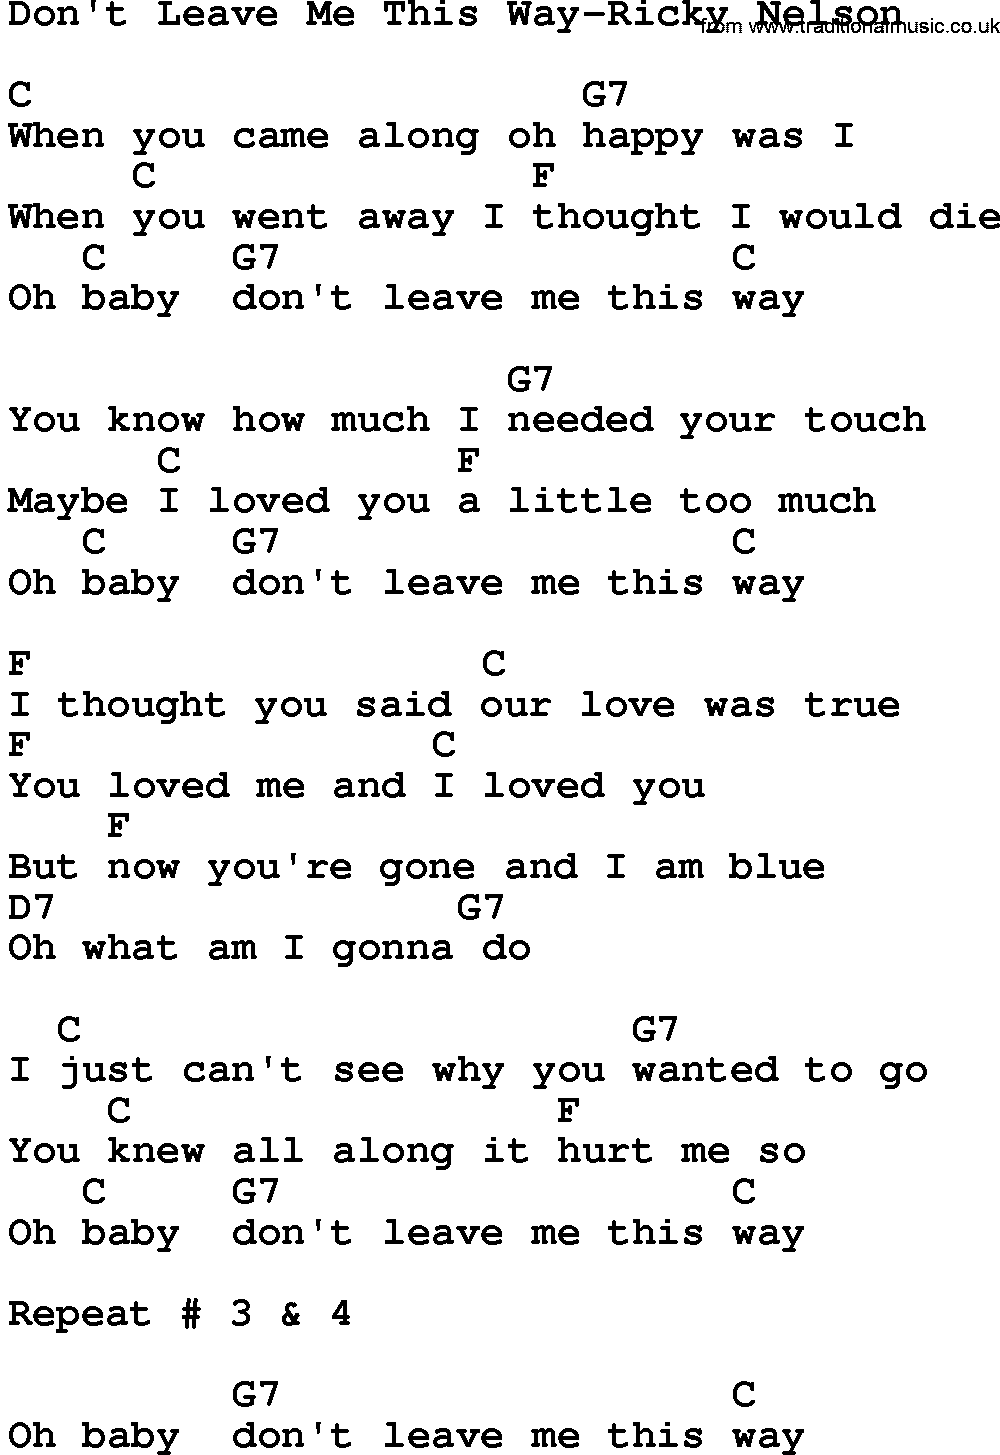 Country music song: Don't Leave Me This Way-Ricky Nelson lyrics and chords